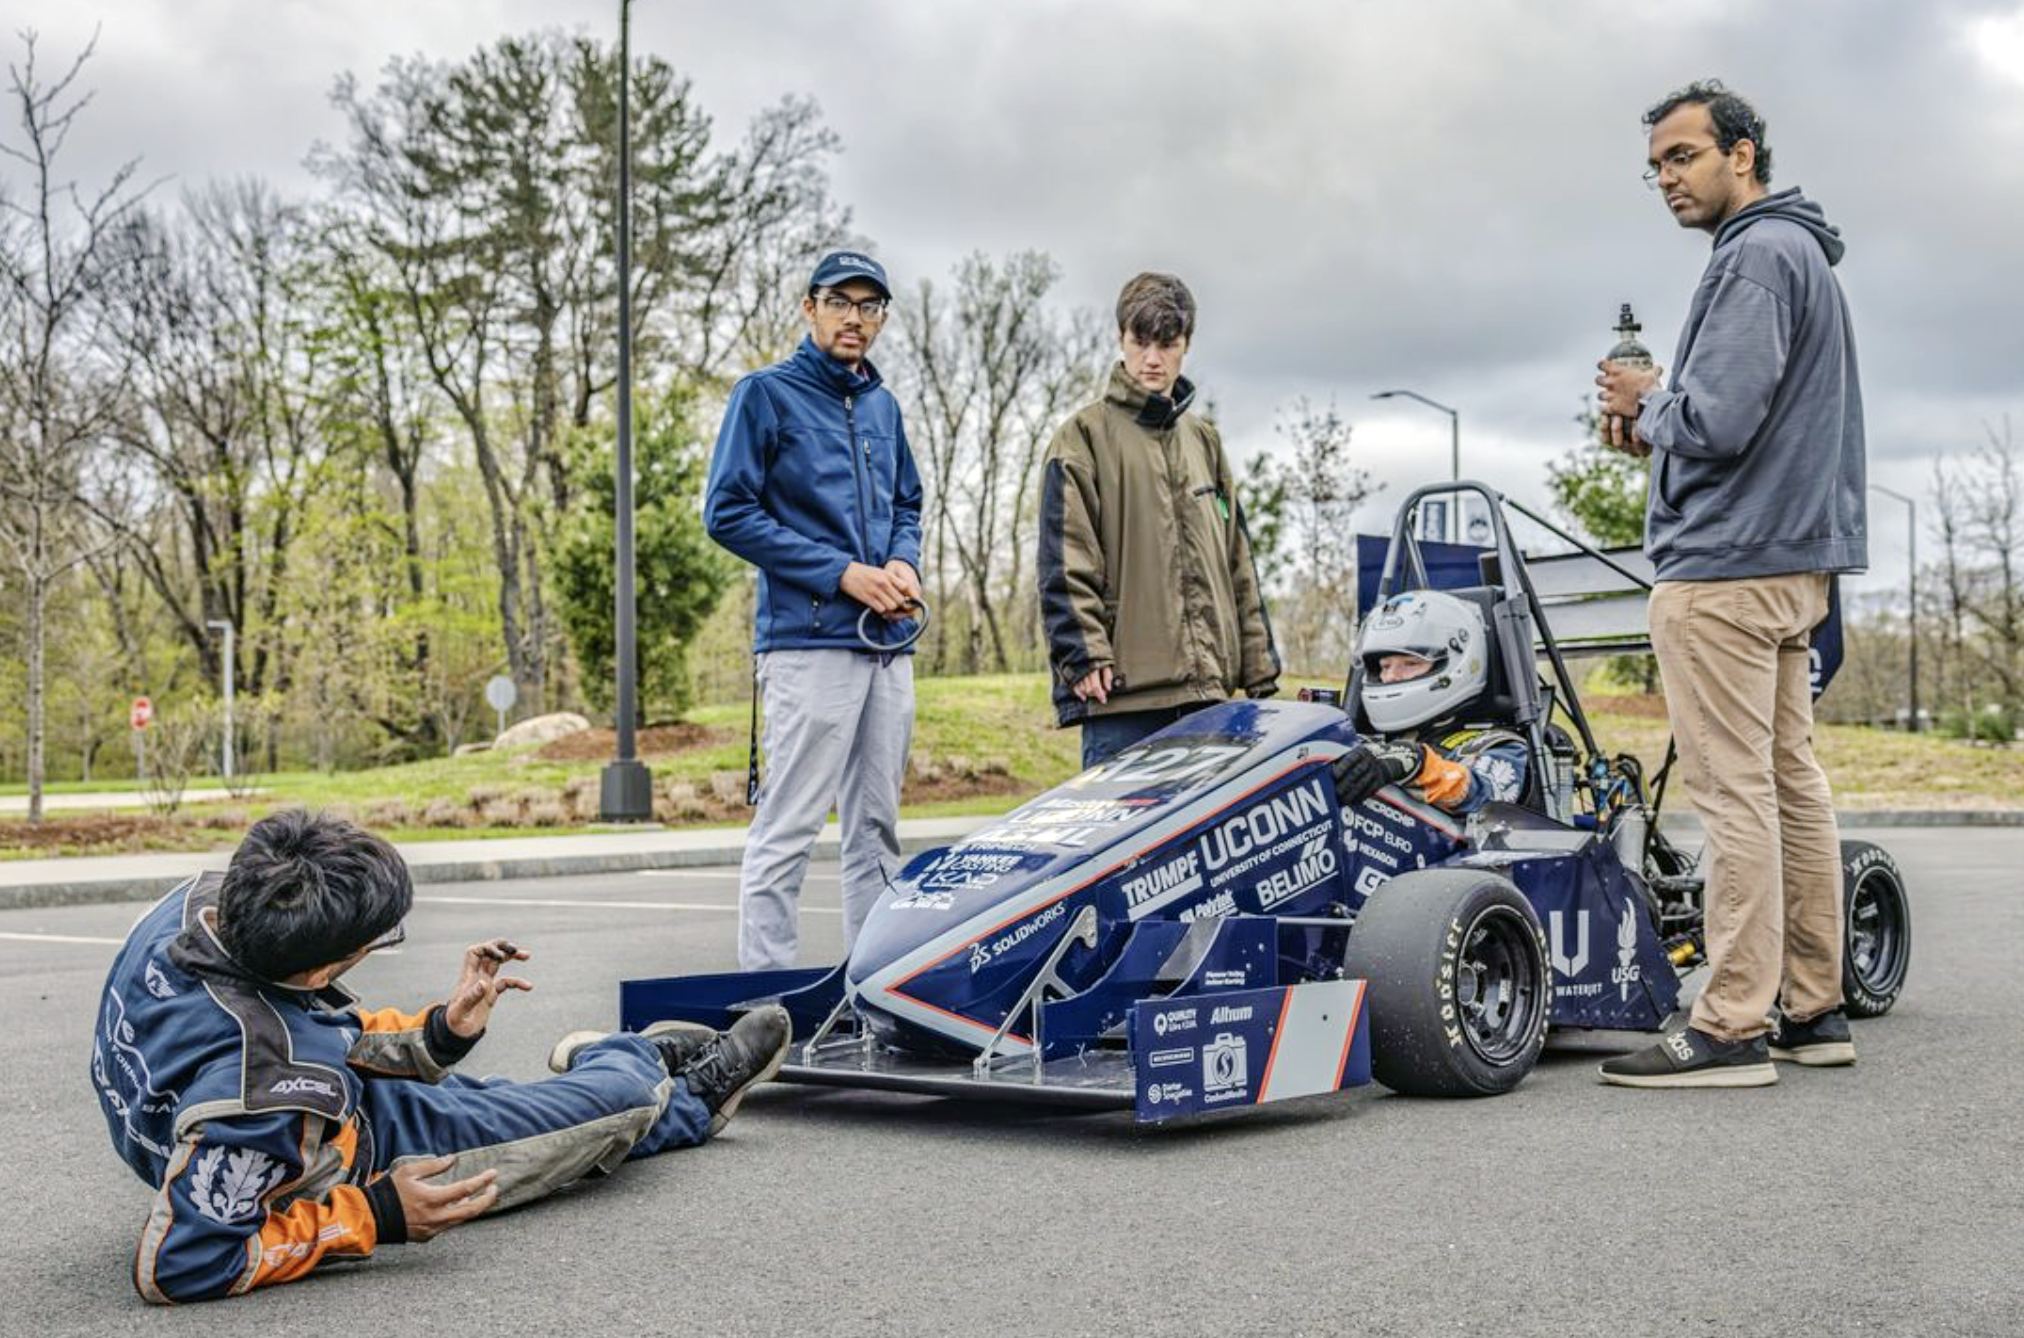 The UConn Formula SAE team examines their vehicle during the competition at Michigan International Speedway.  